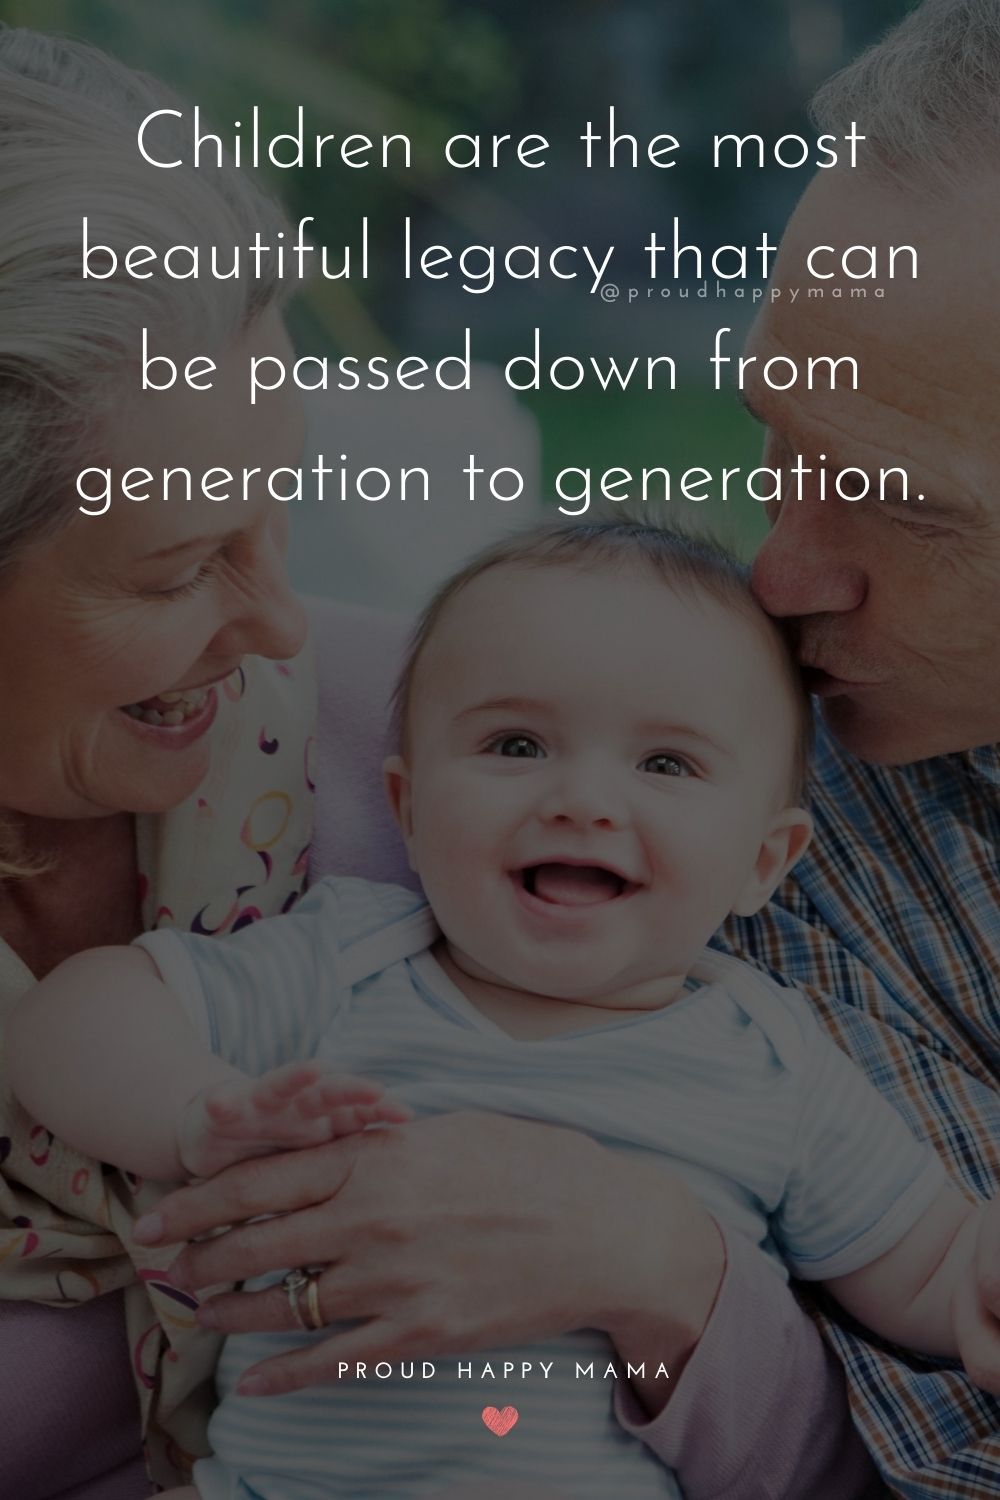 Granddaughters Quotes - Children are the most beautiful legacy that can be passed down from generation to generation.